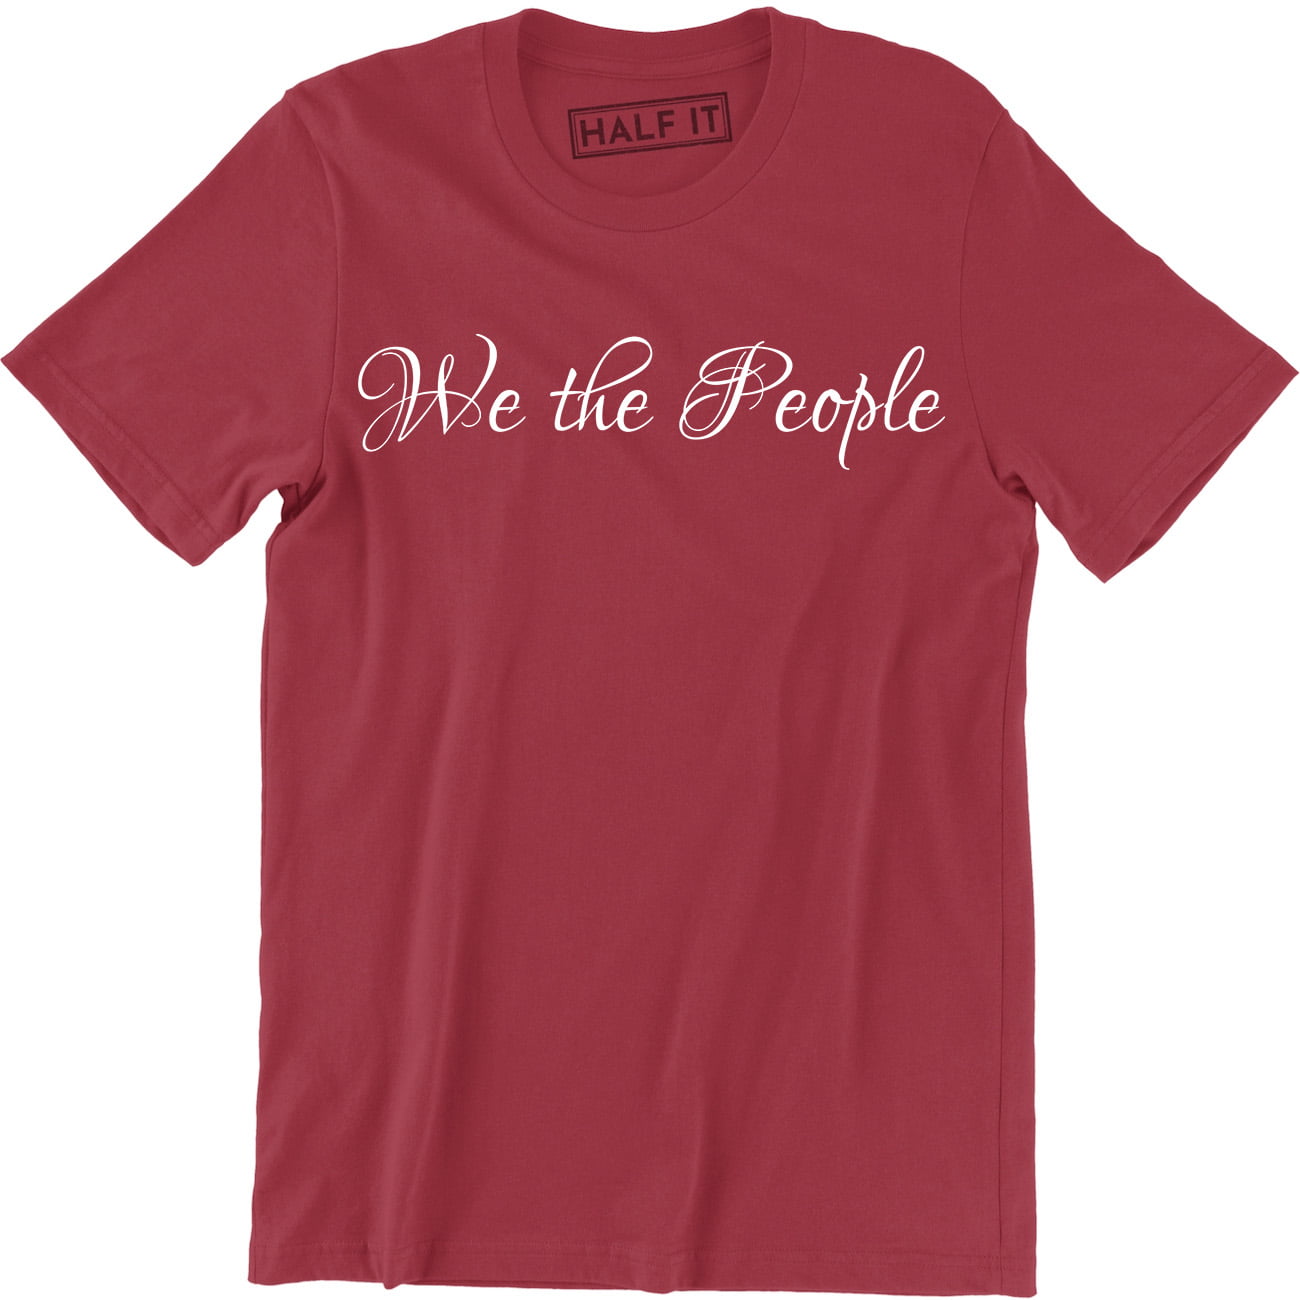 USA We The People US Constitution Black T-Shirt July 4th Swag America Independence Day tee unisex shirt for women men Patriotic